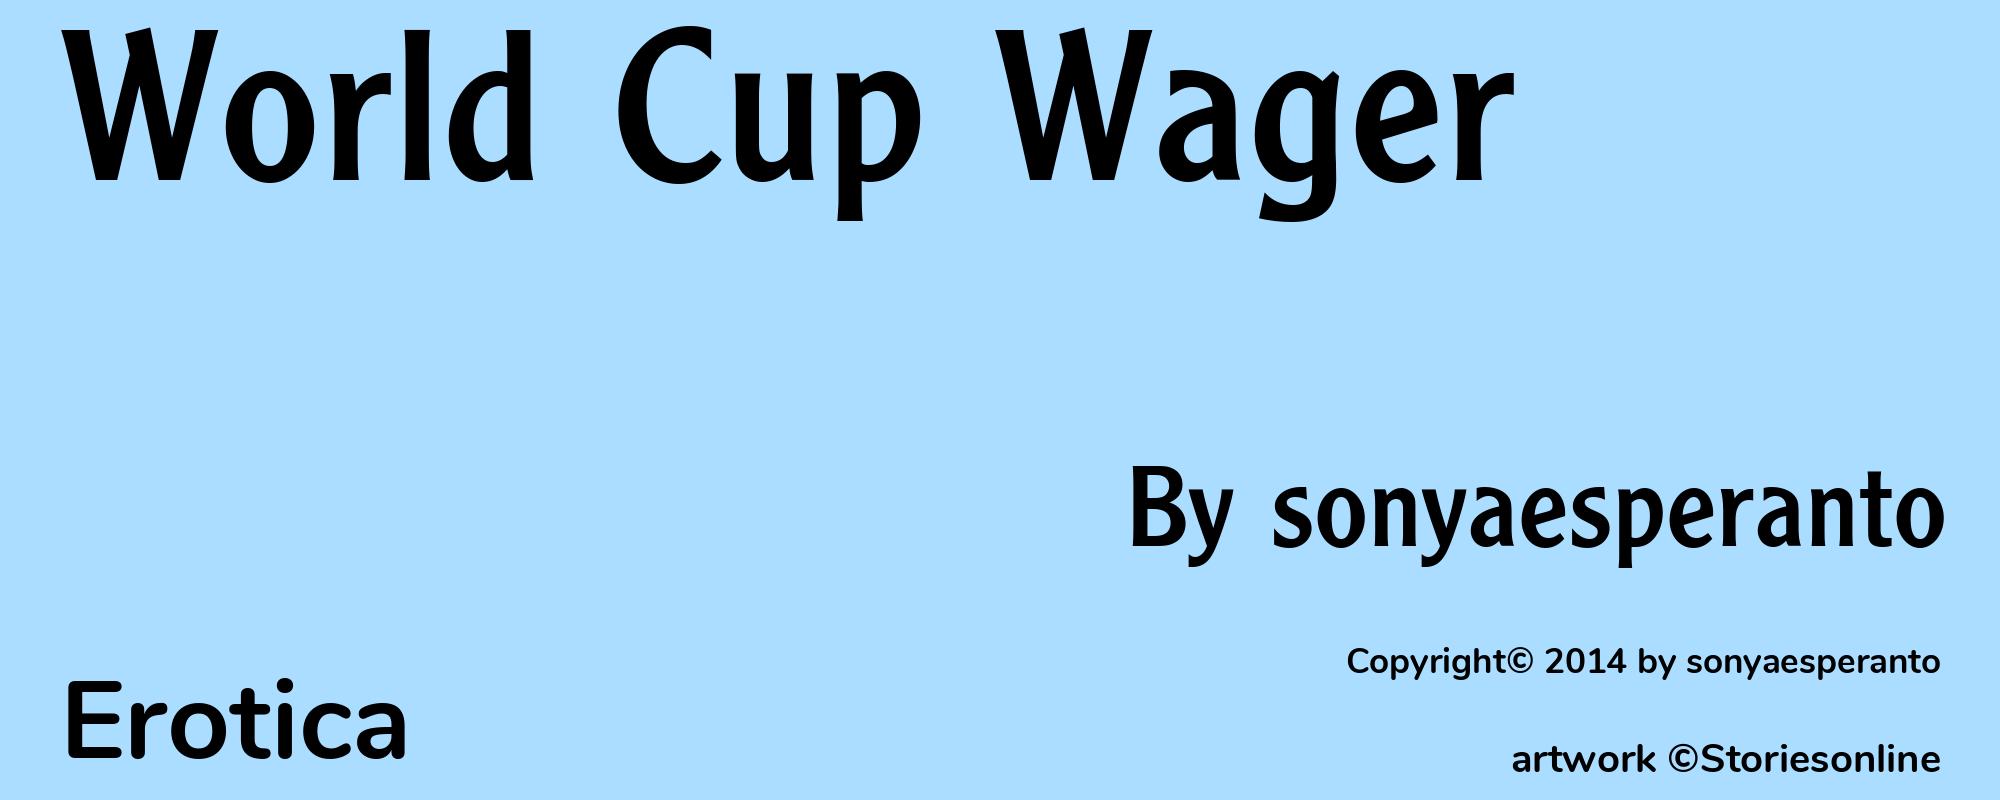 World Cup Wager - Cover